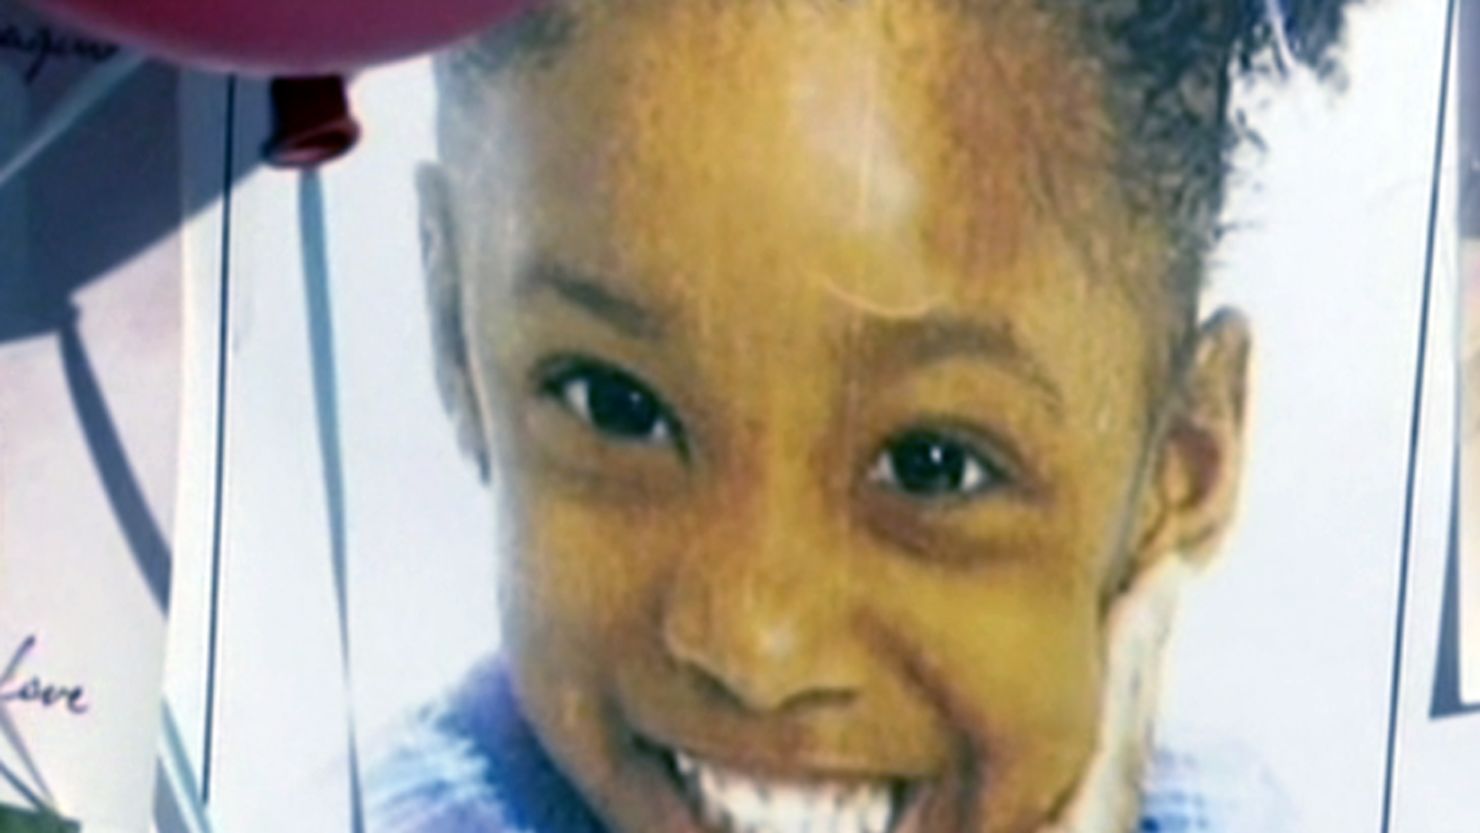 Jhessye Shockley, age 5, has been missing from her Arizona home since October.